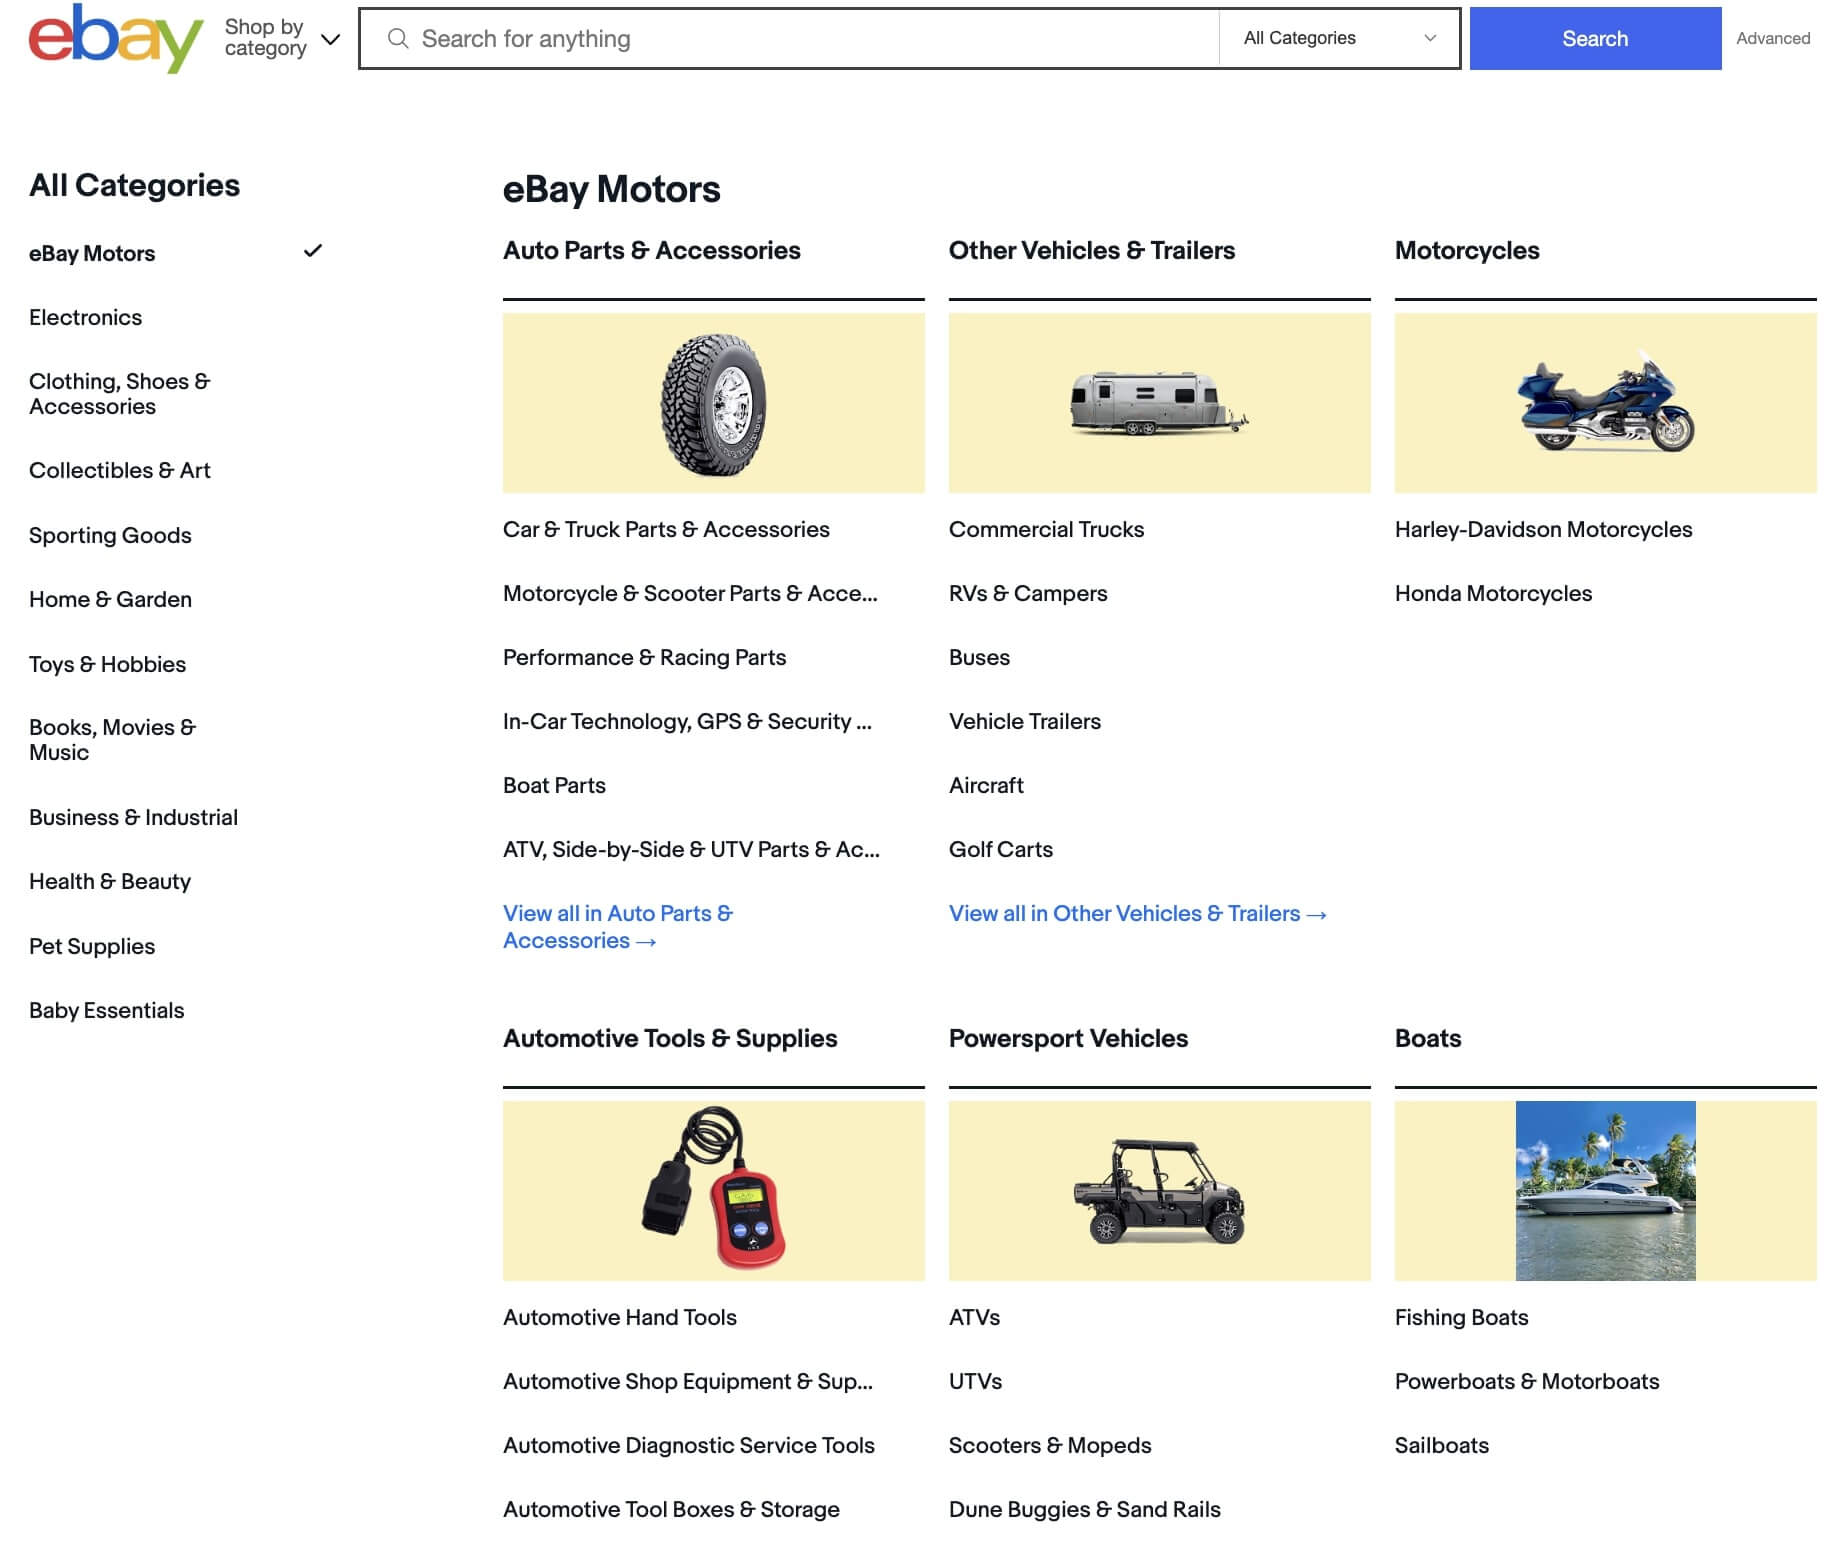 The "eBay categories" page, with the eBay motors menu selected, showcasing sections with products from Auto Parts & Accessories to Automotive Tools & Supplies to Boats.